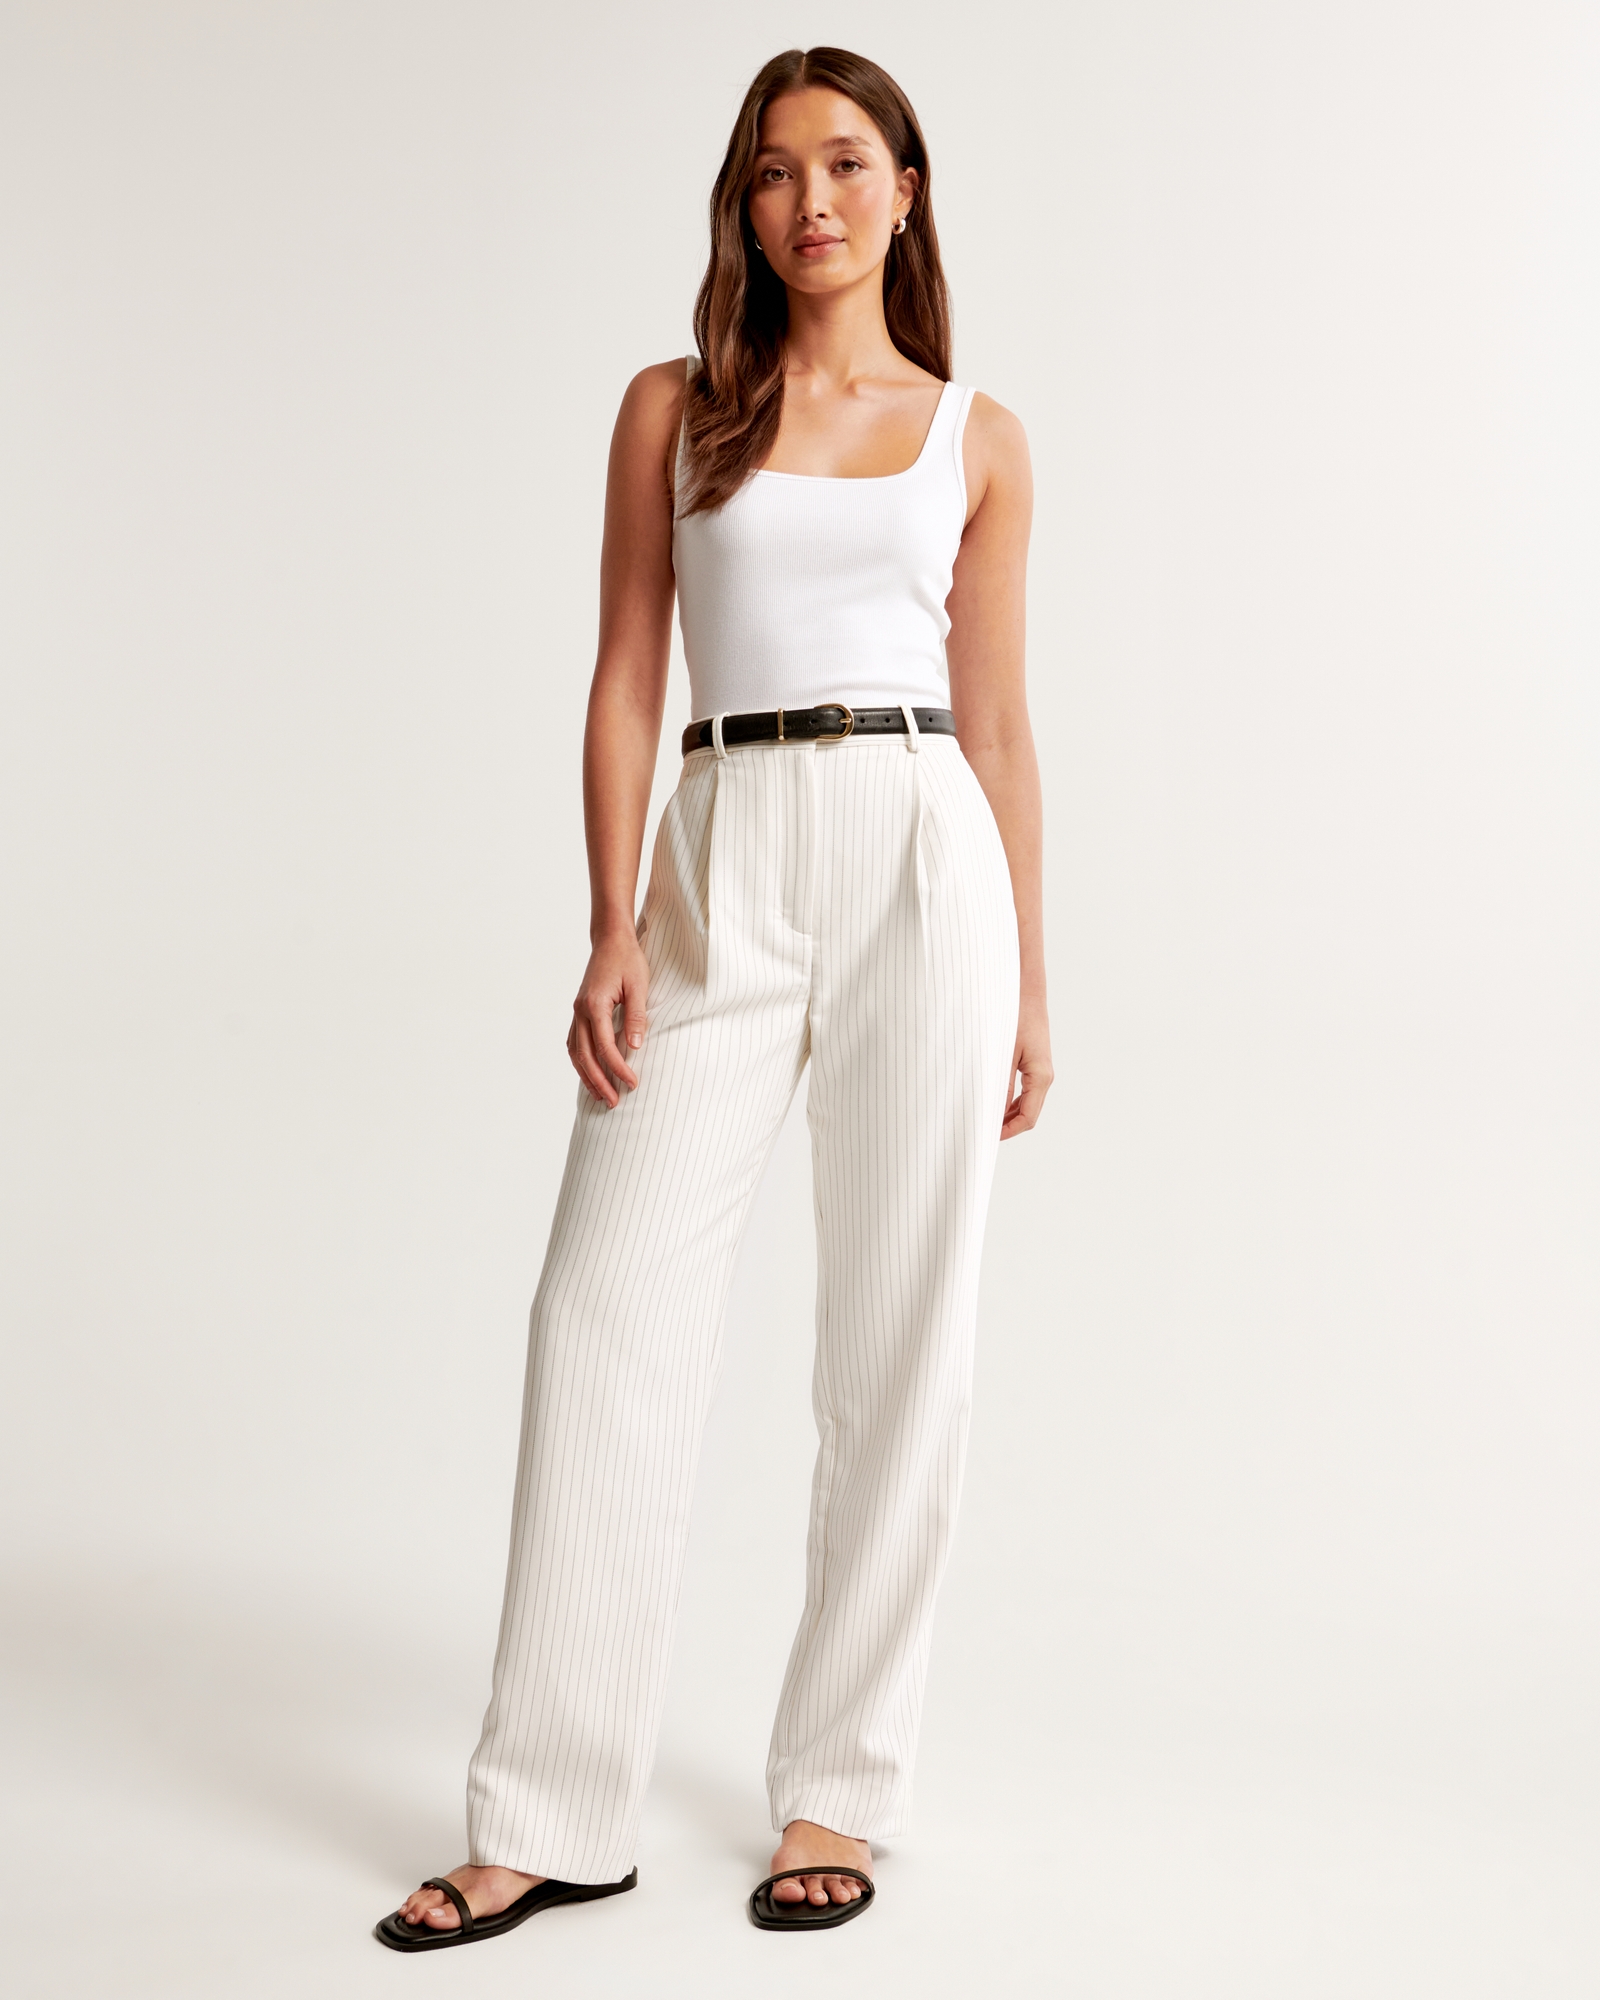 Women's Tailored Relaxed Straight Pant